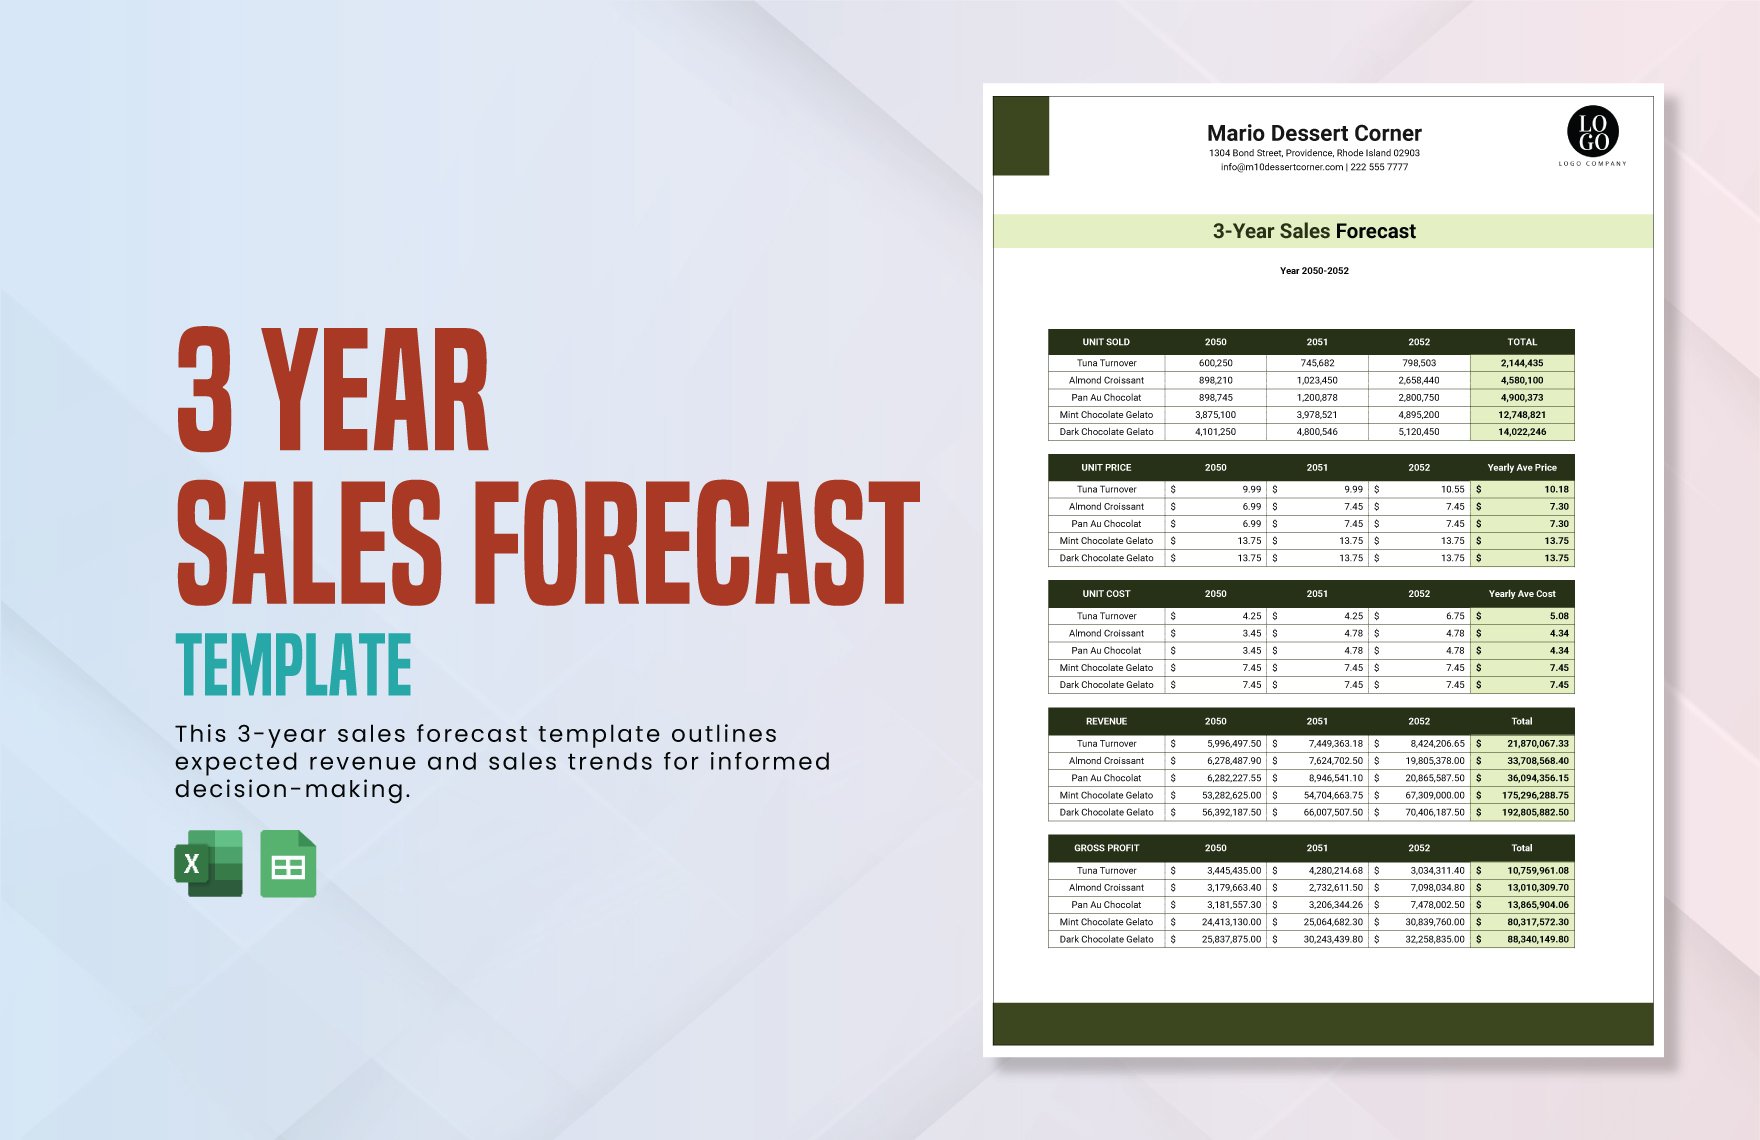 3-year Sales Forecast Template